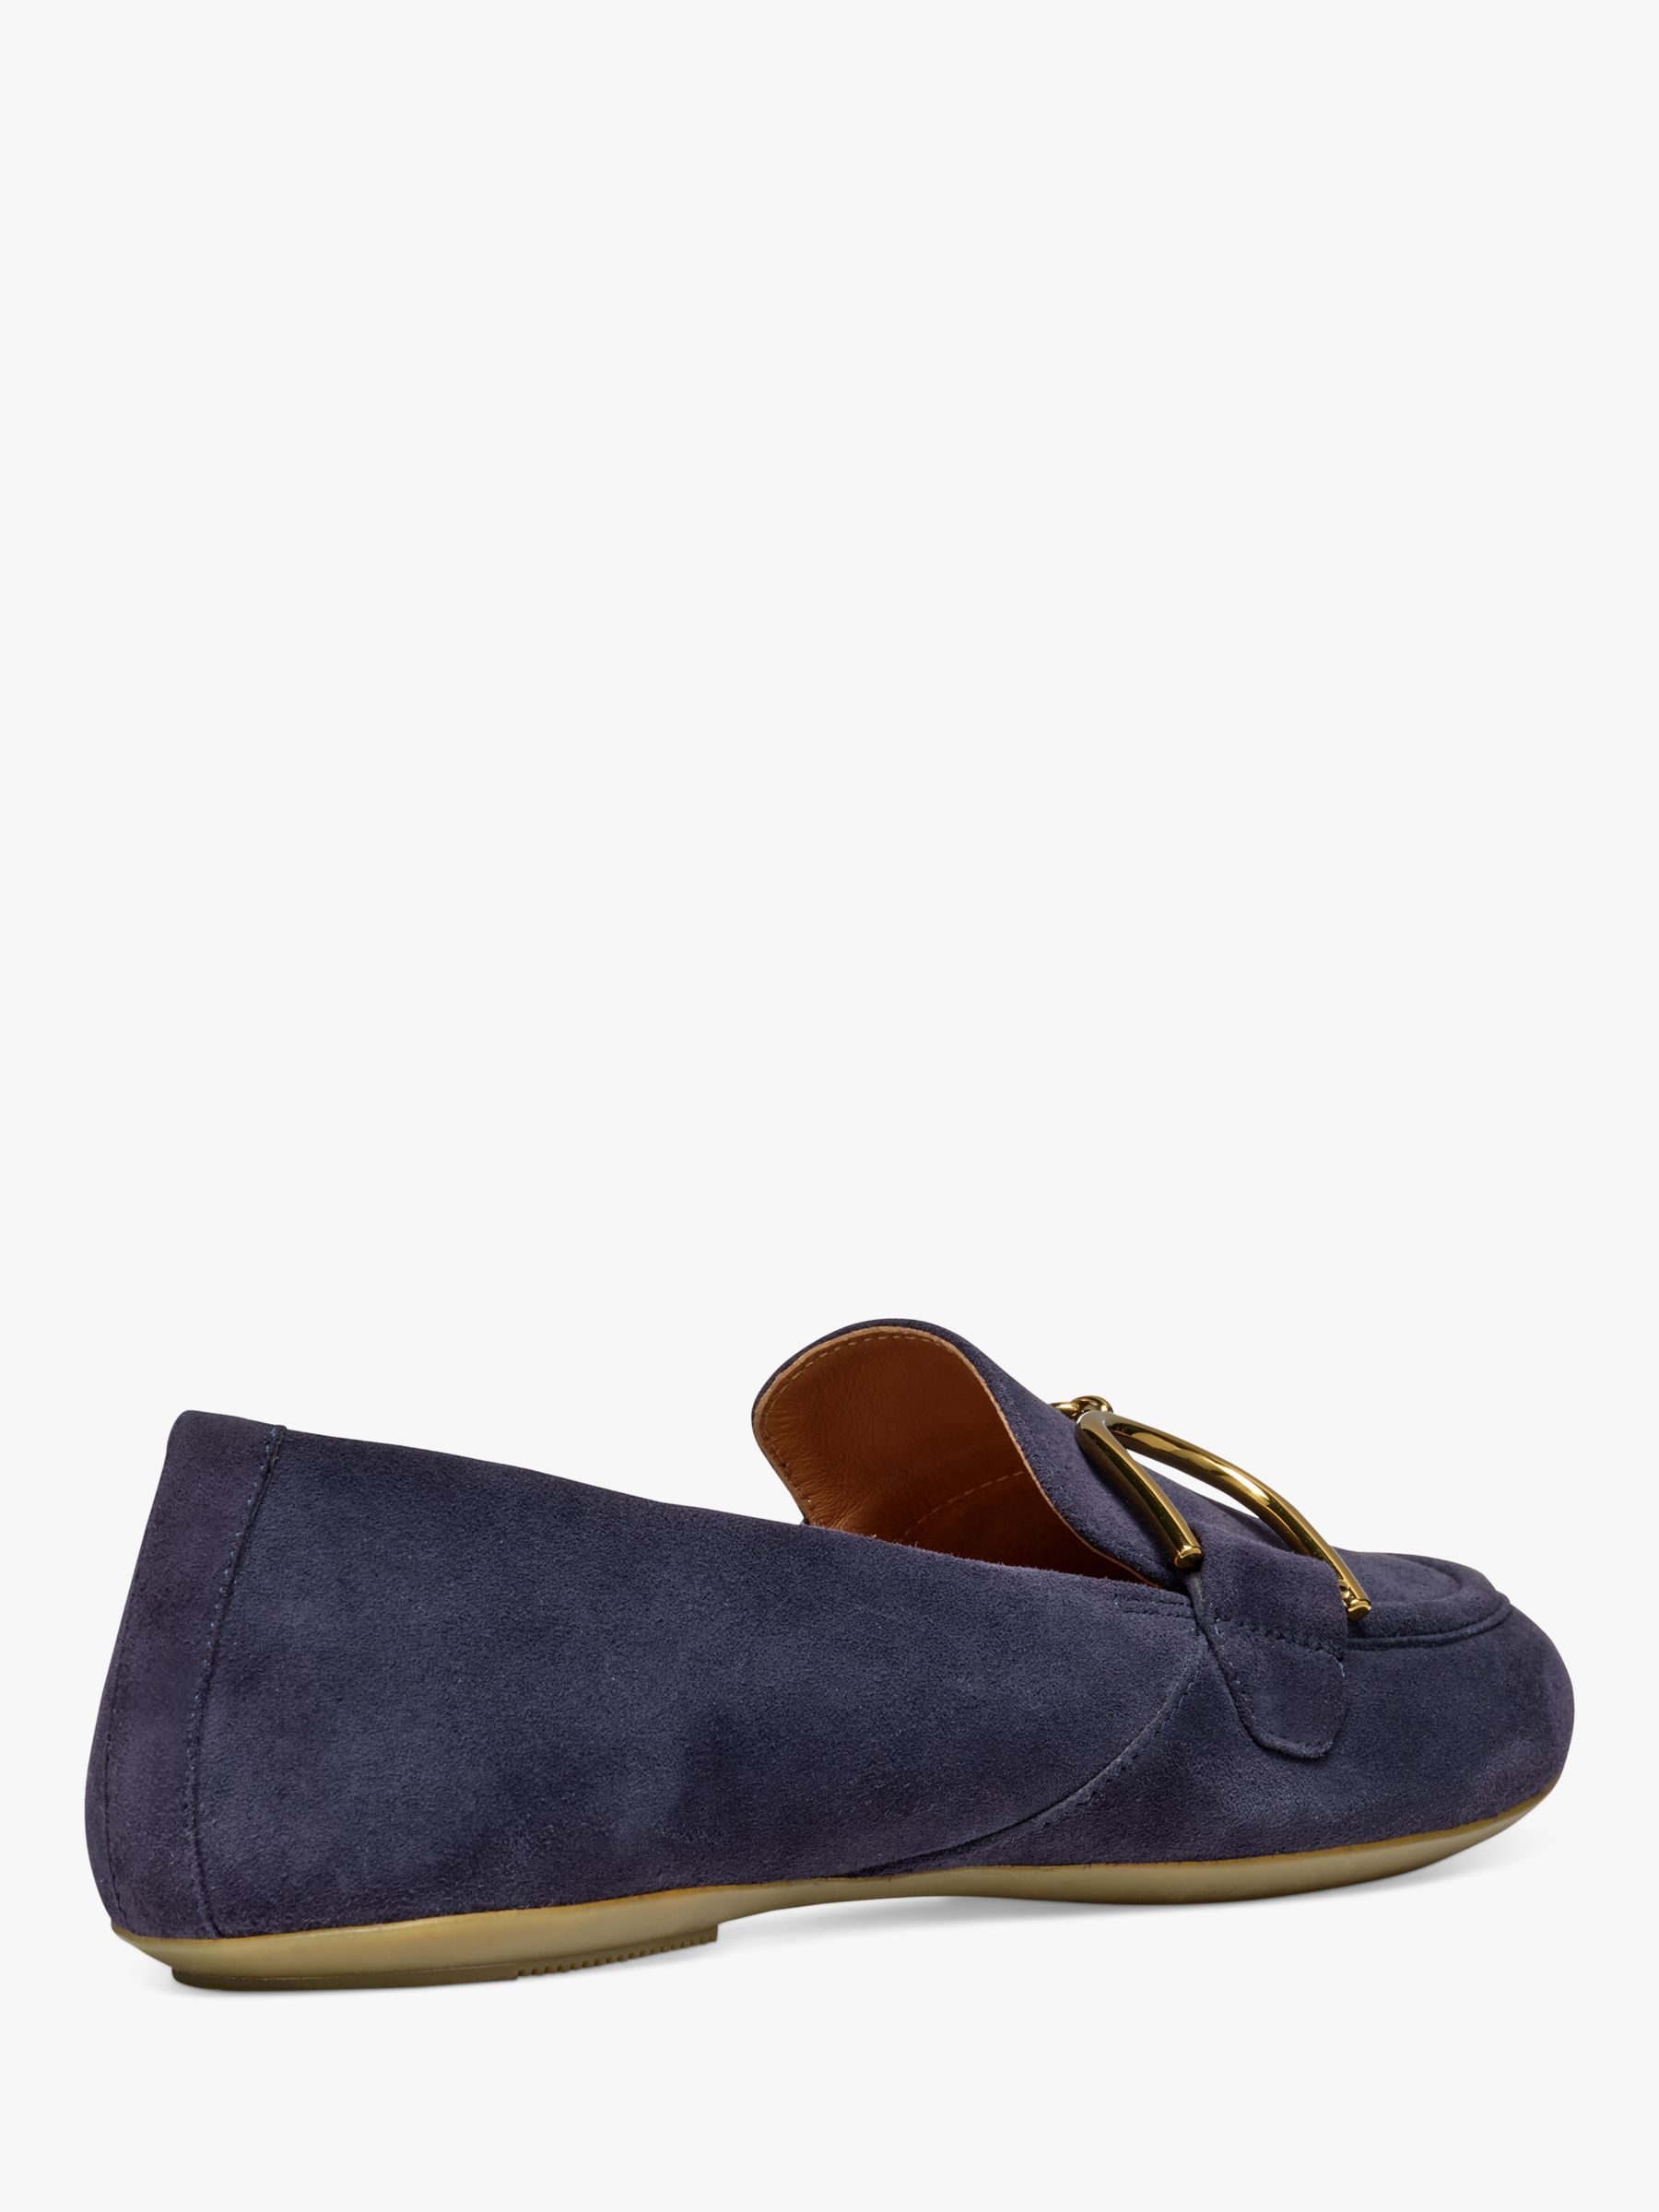 Geox Palmaria Suede Loafers, Navy at John Lewis & Partners